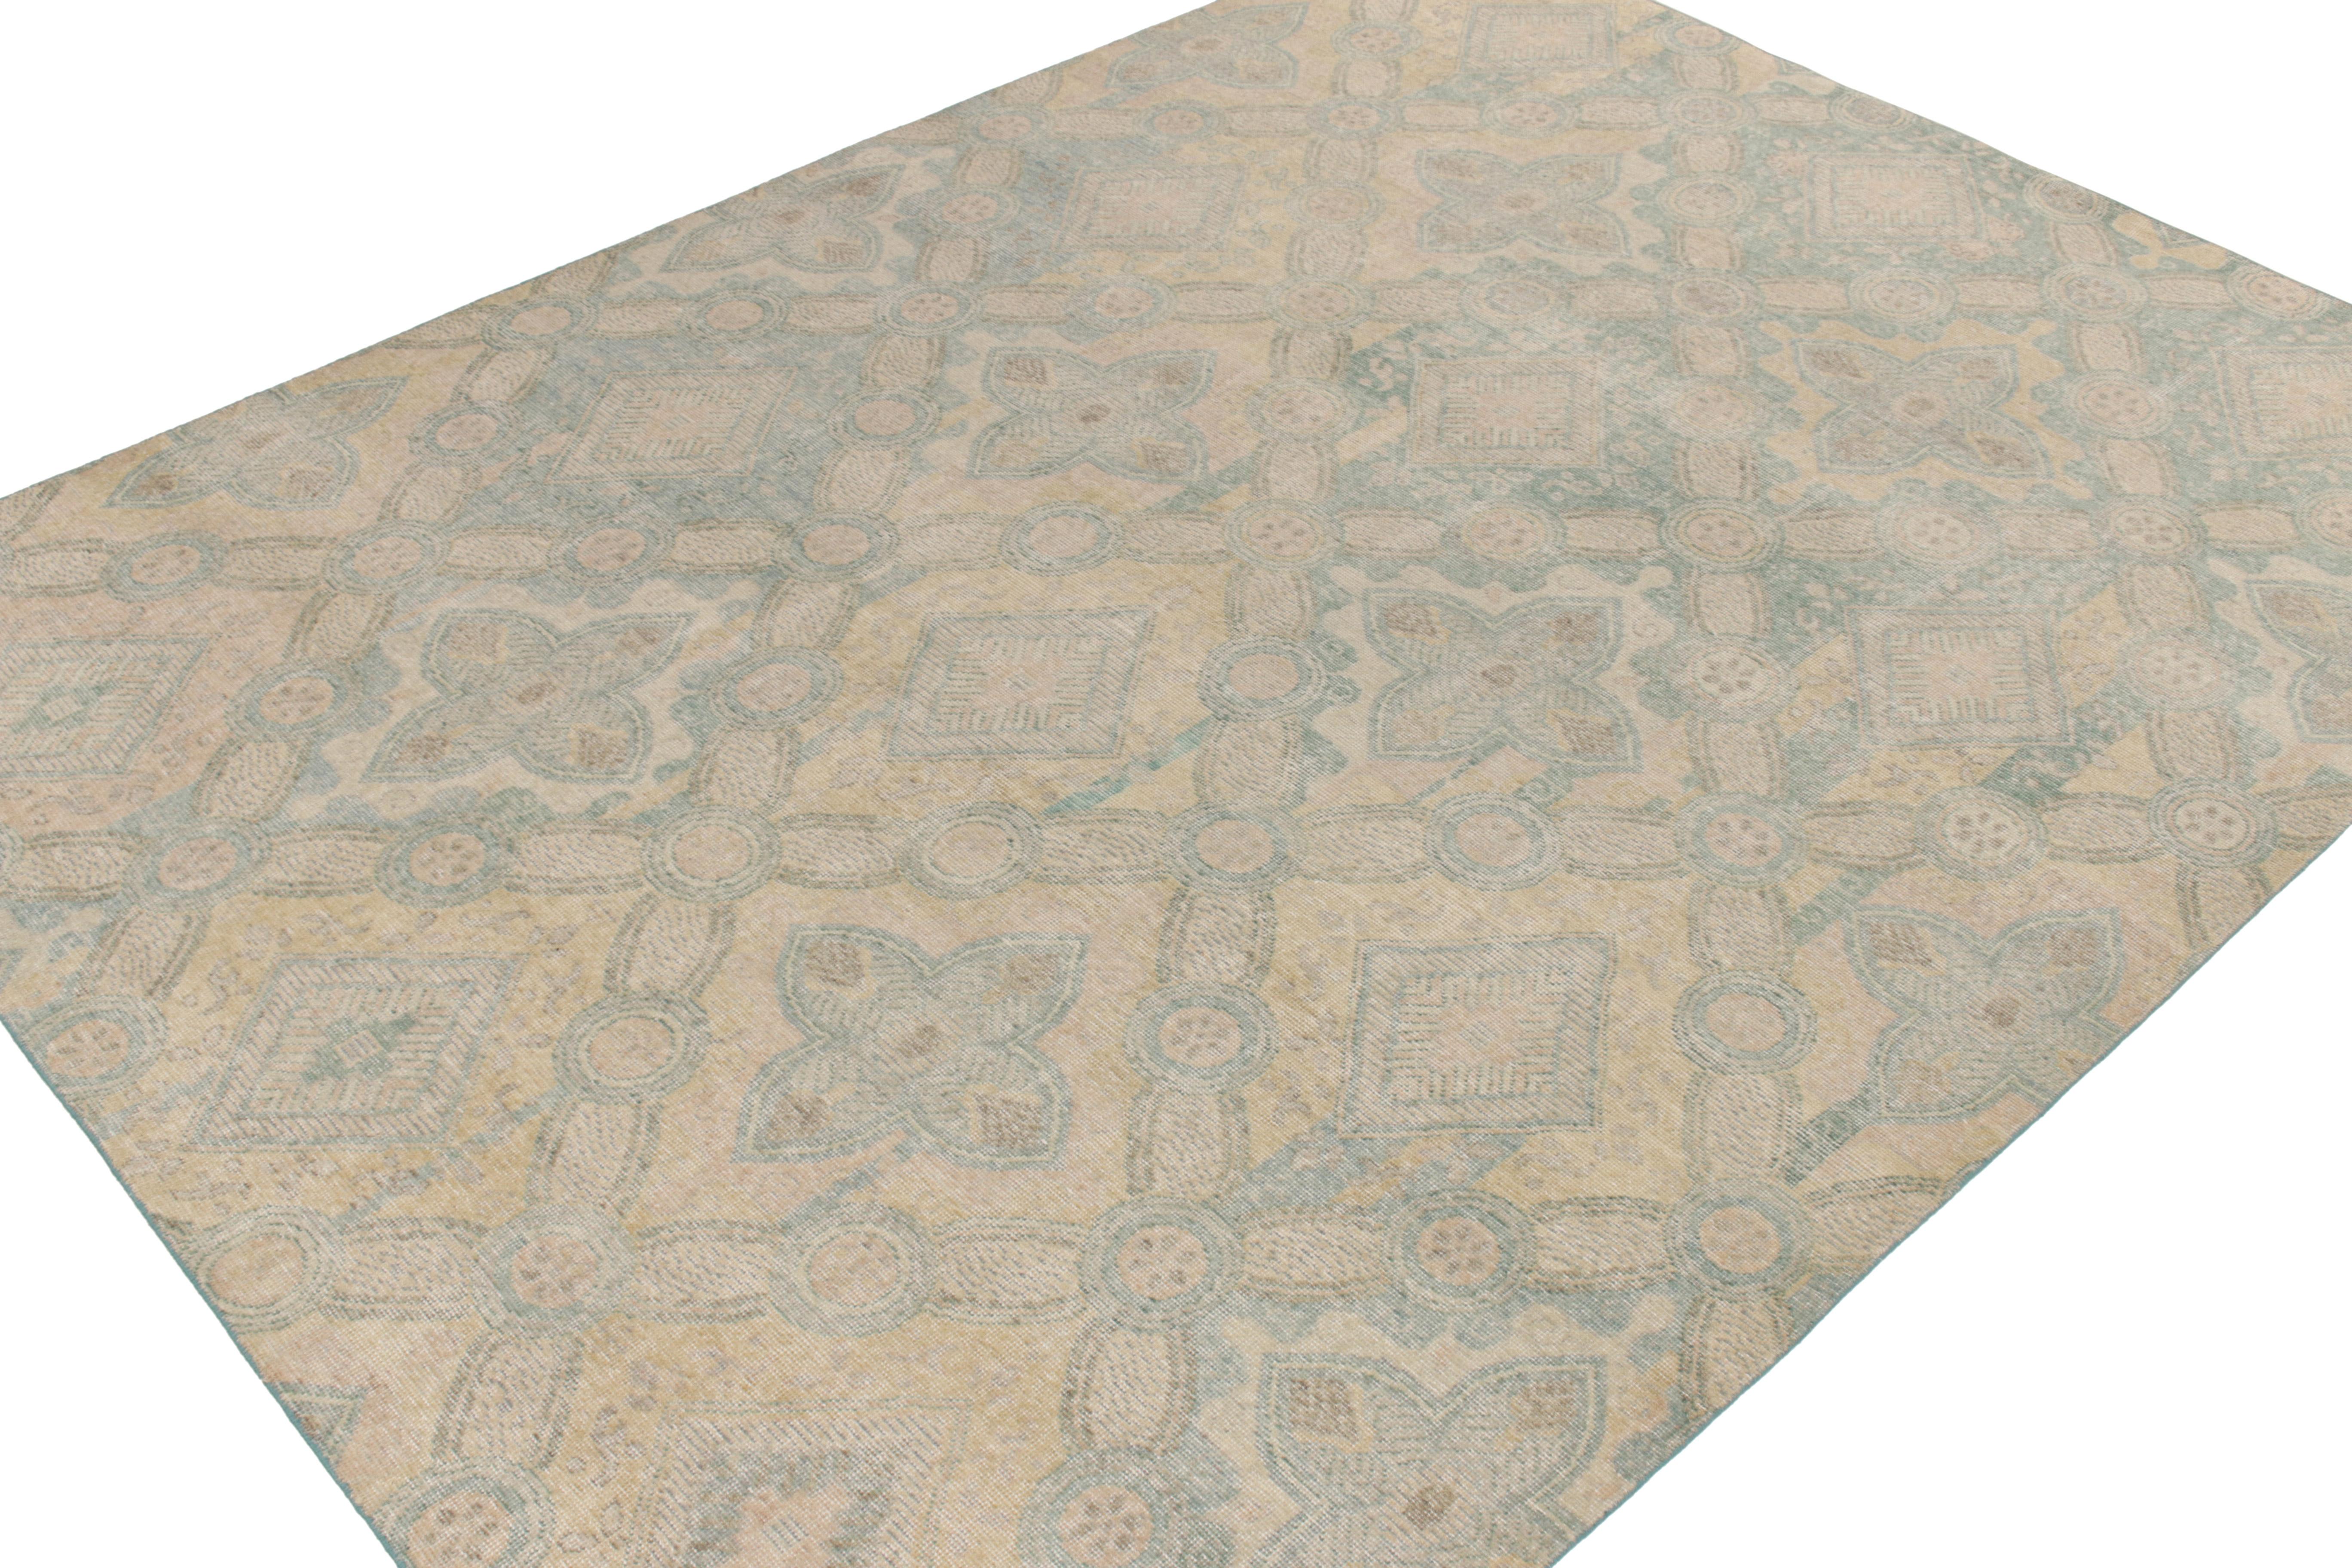 Art Deco Rug & Kilim's Distressed Transitional Deco Style Rug, Cream, Blue Floral For Sale